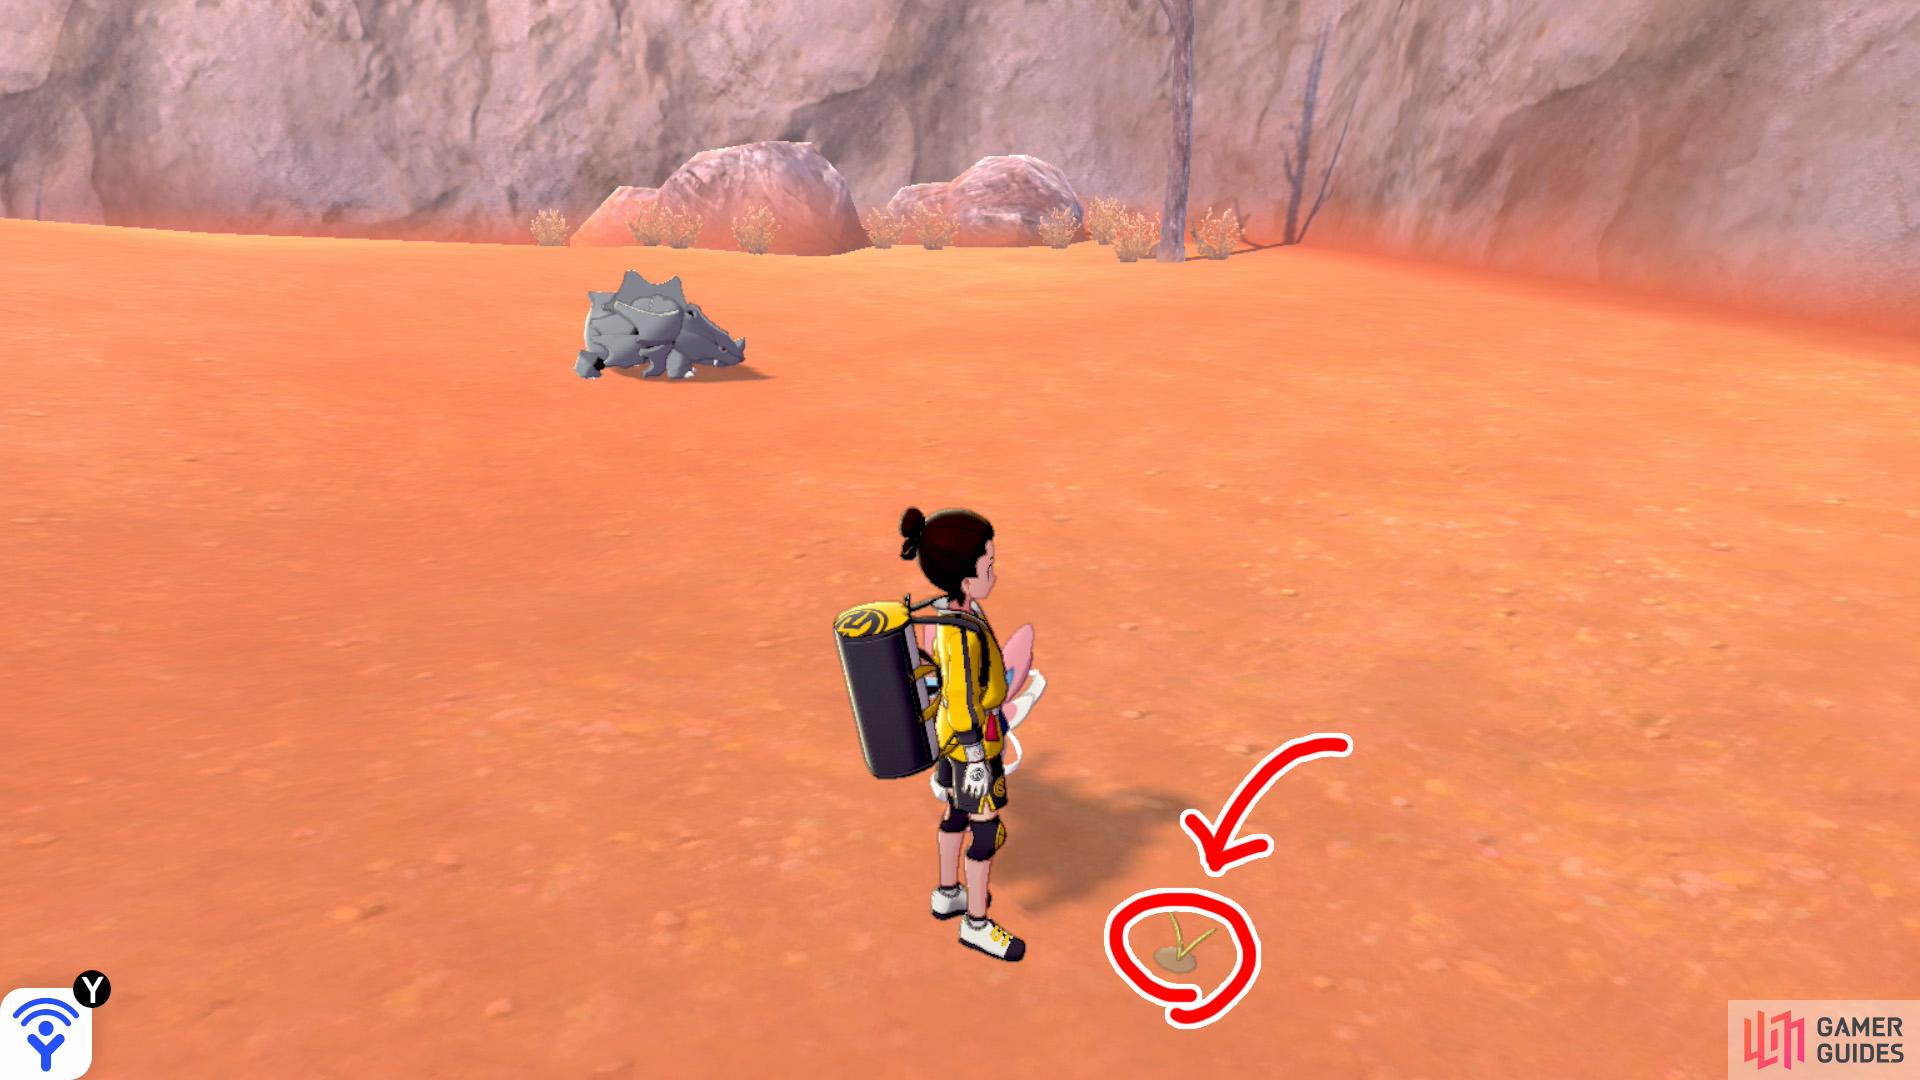 4/10: From Diglett 3, stand where the gold item ball (TR21 Reversal) is, with the cliff wall to your back. Run straight ahead for around 10 seconds. It's located in the desert sand, far from any discernible landmarks.